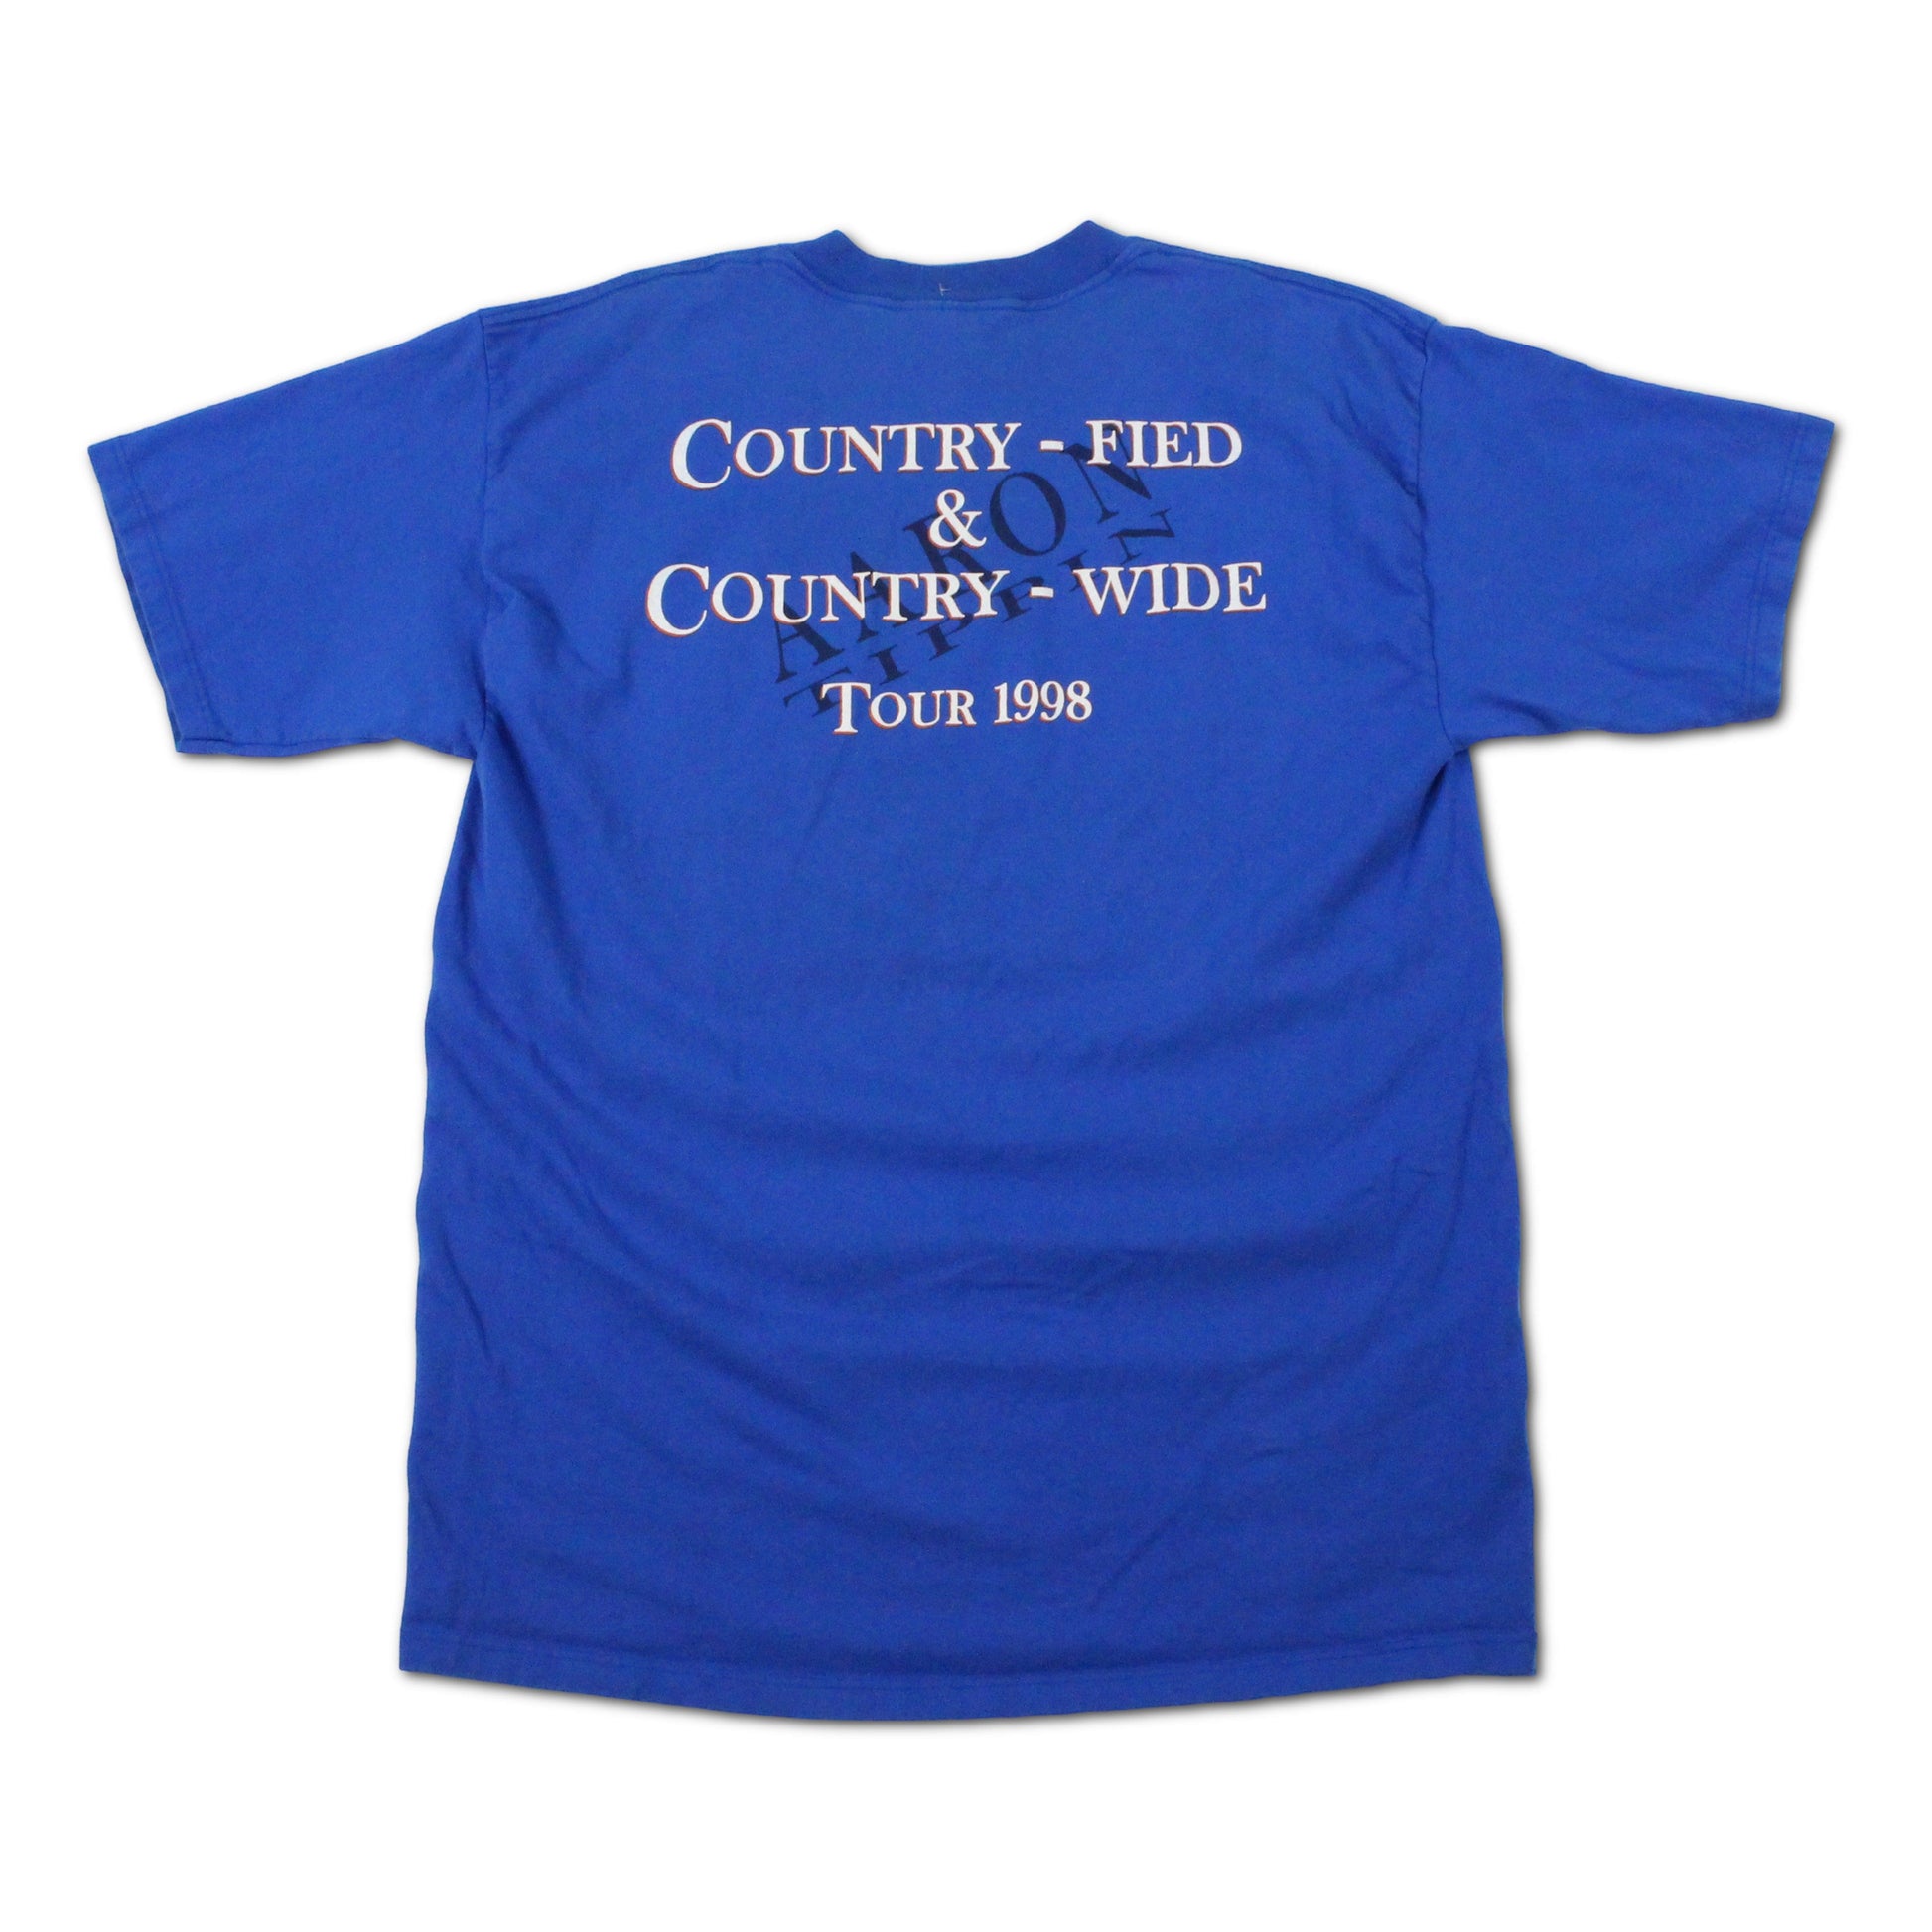 Vintage Vintage Aaron Tippin Country-fied 1998 Tour T Shirt Size XL